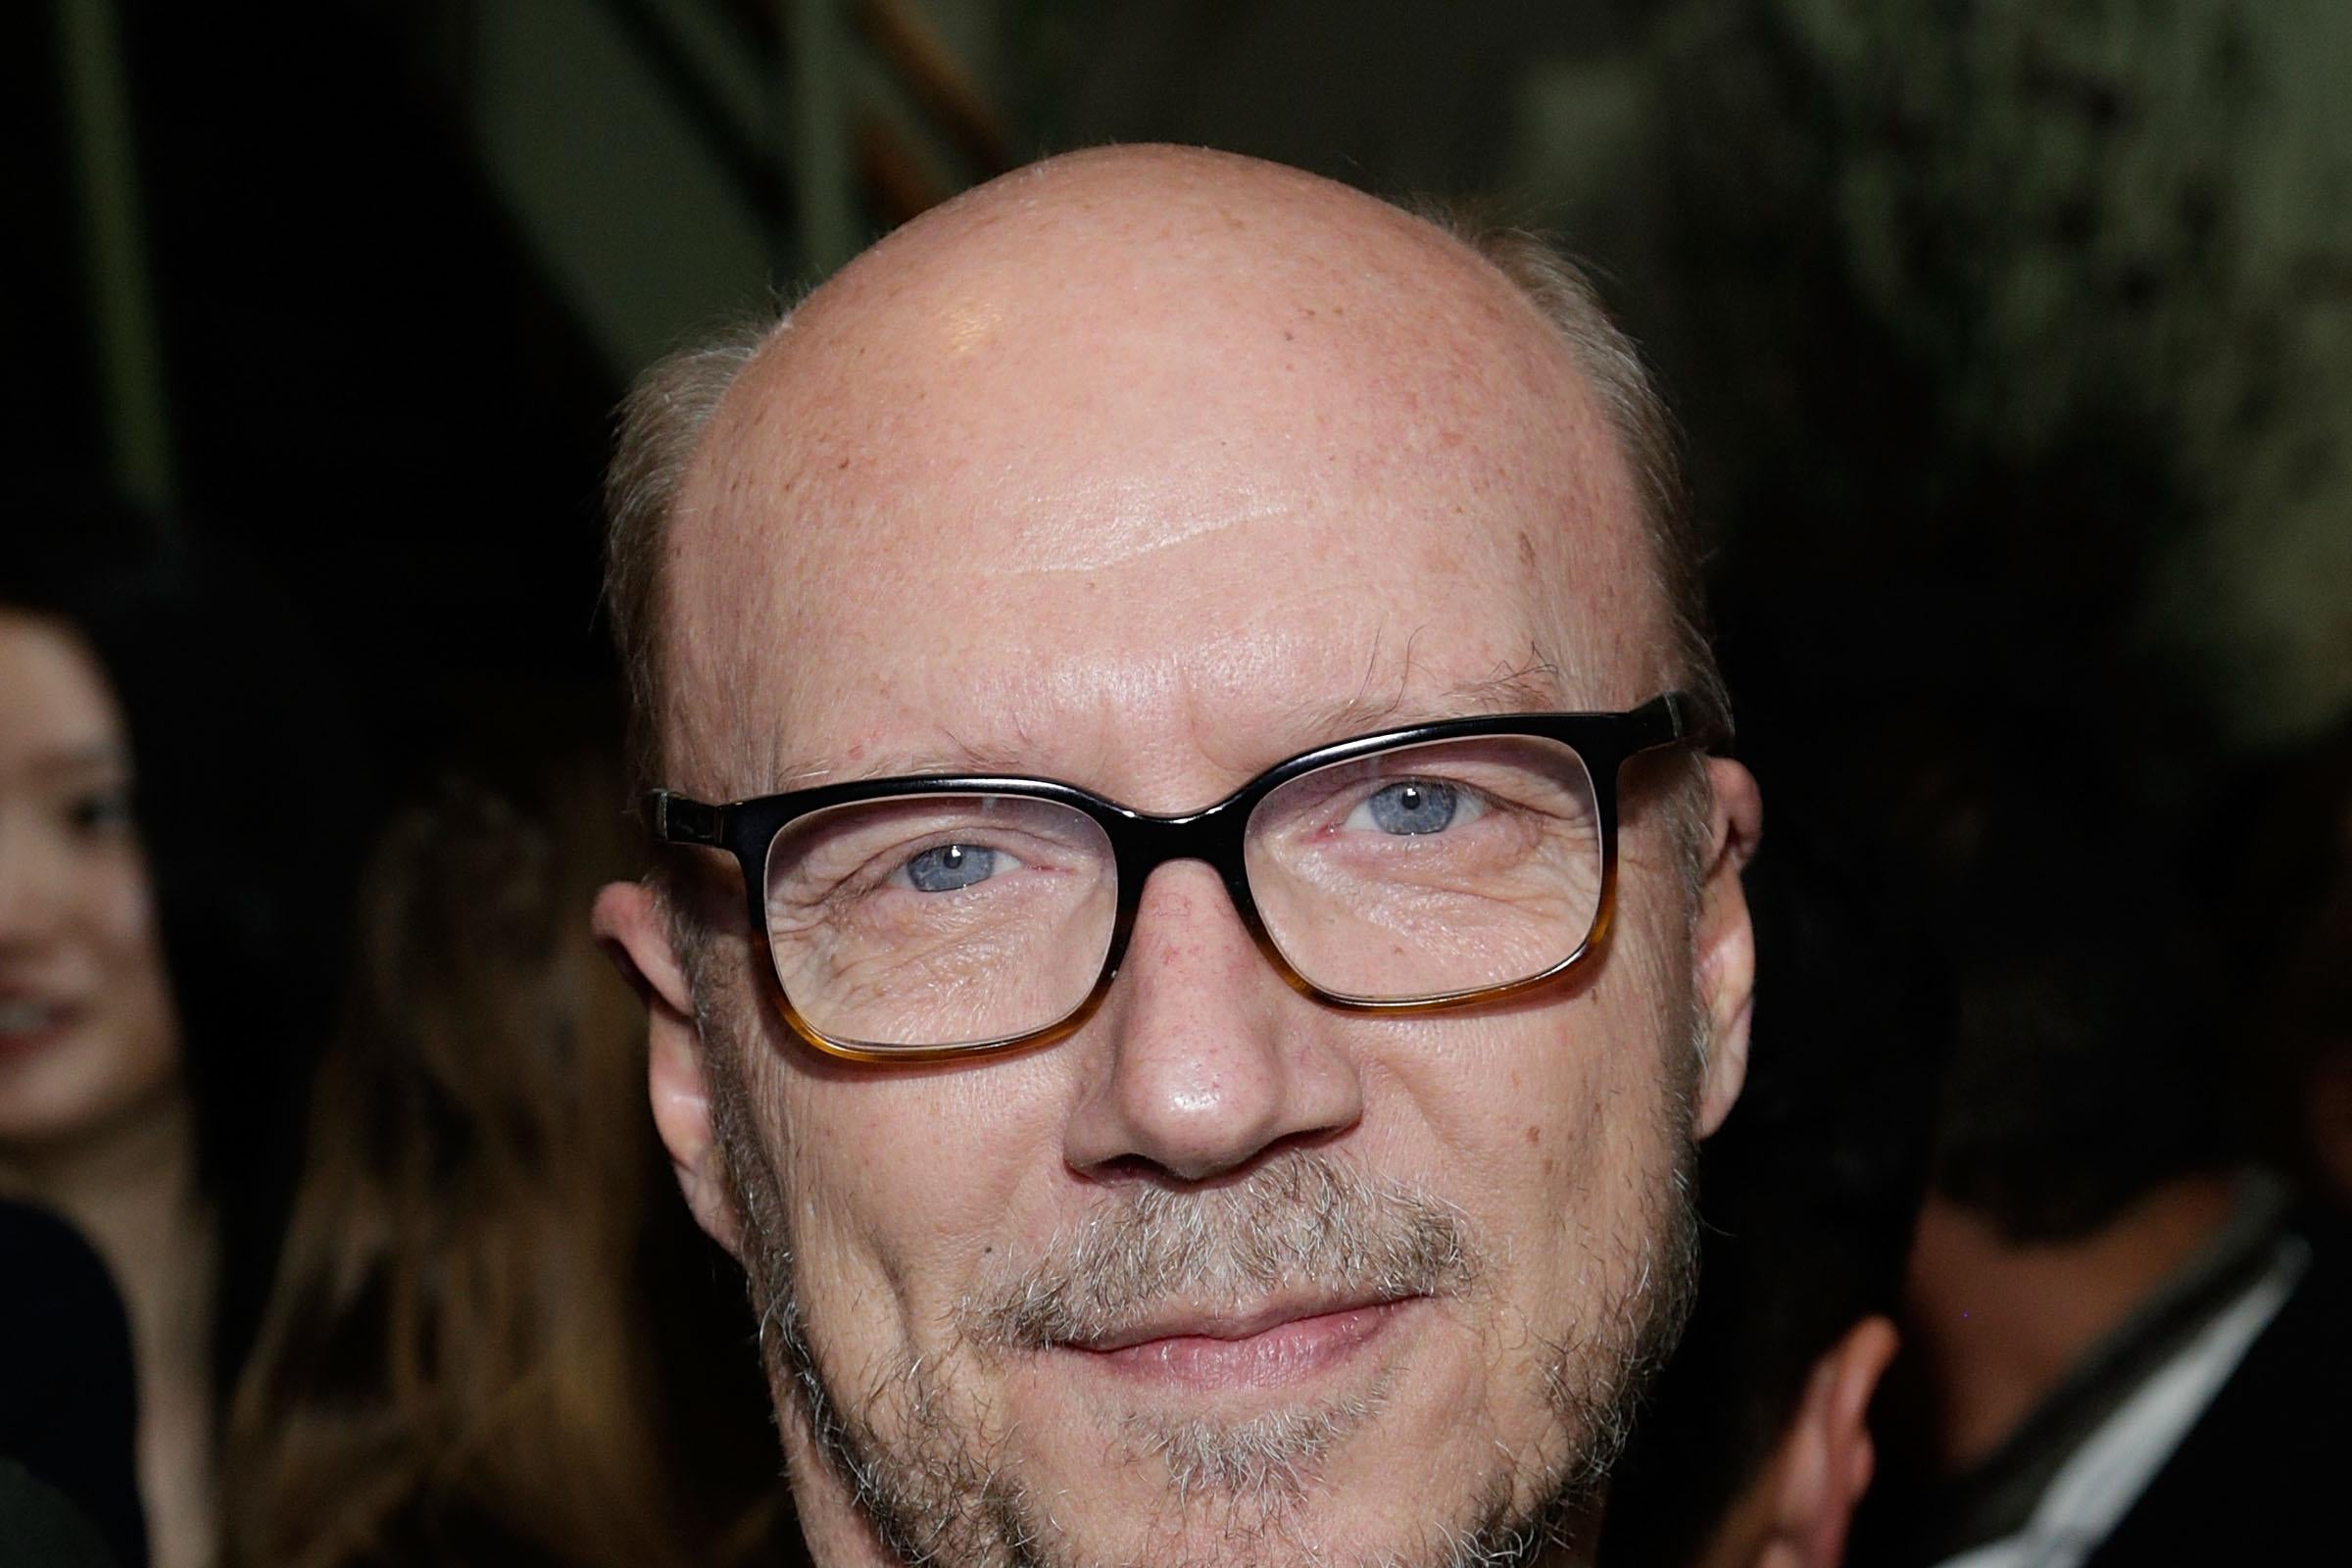 Paul Haggis at an industry event.